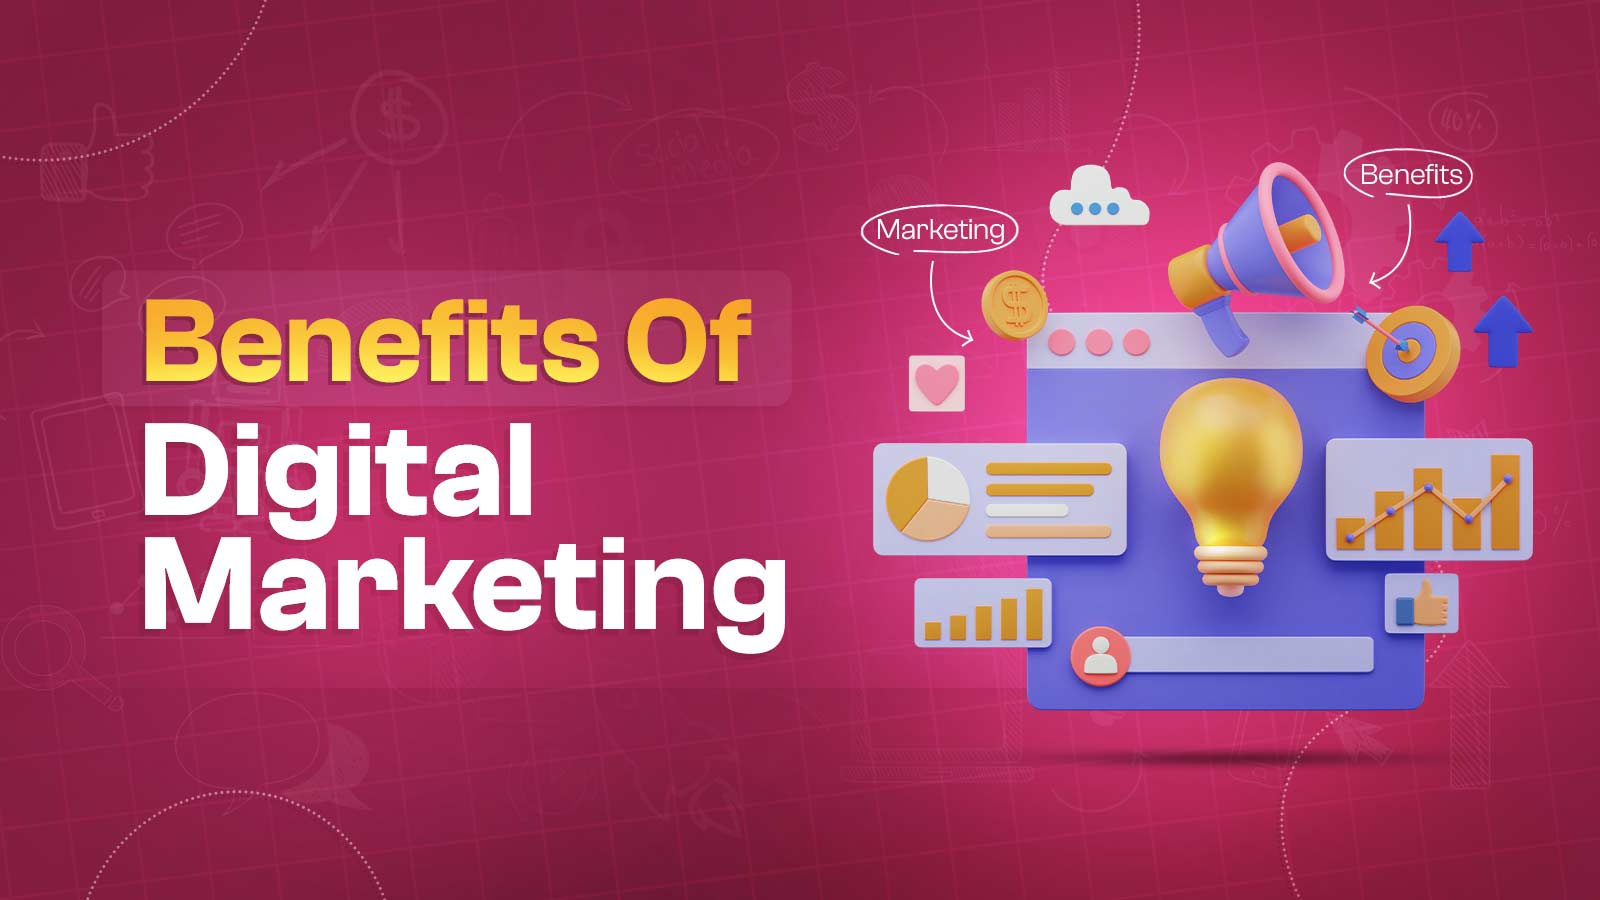 10 Key Benefits Of Digital Marketing For All Businesses